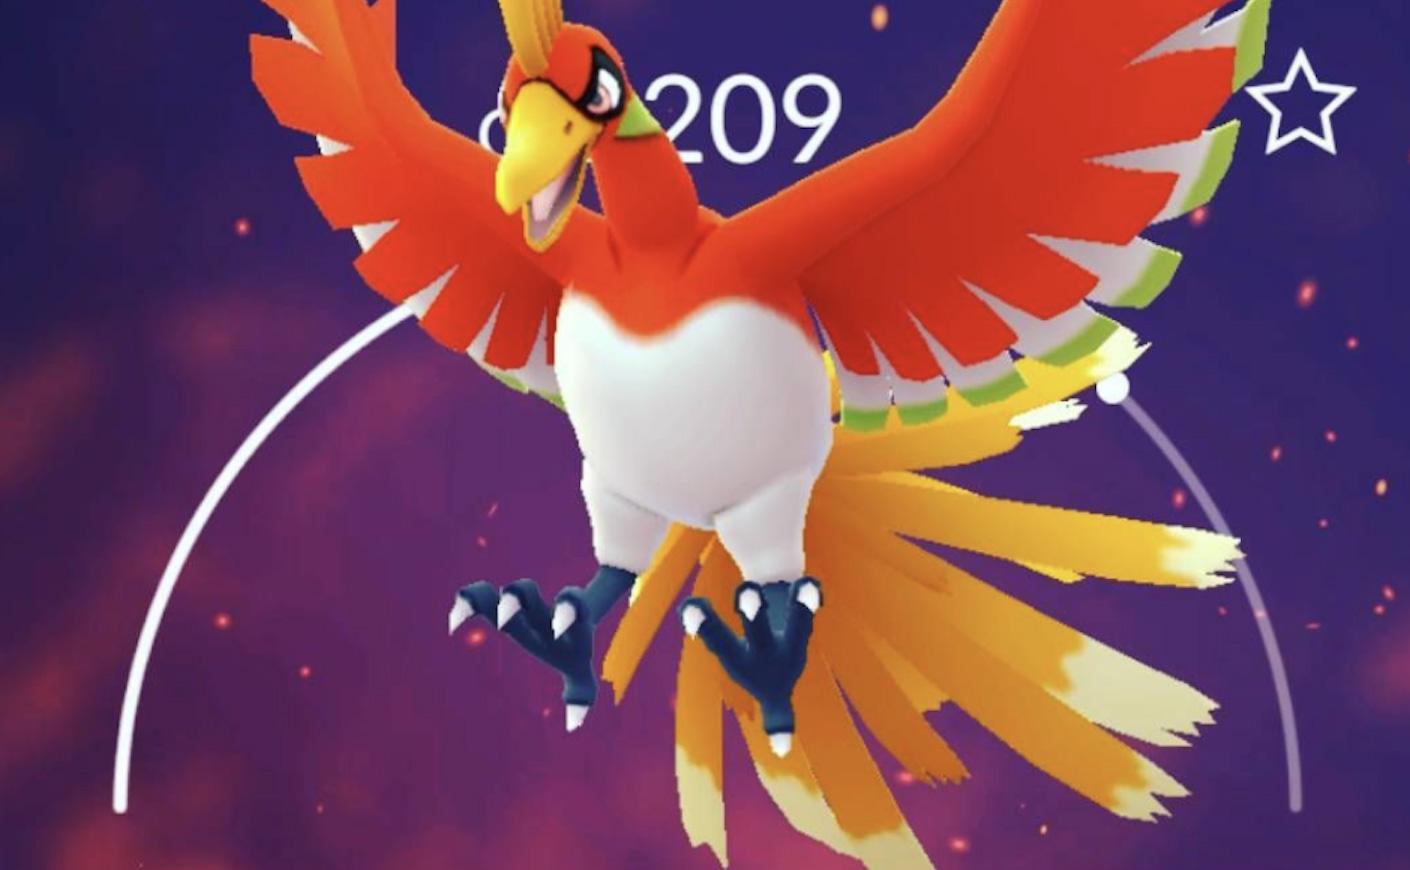 How to get Ho-Oh in Pokemon Go: Can it be shiny & best counters